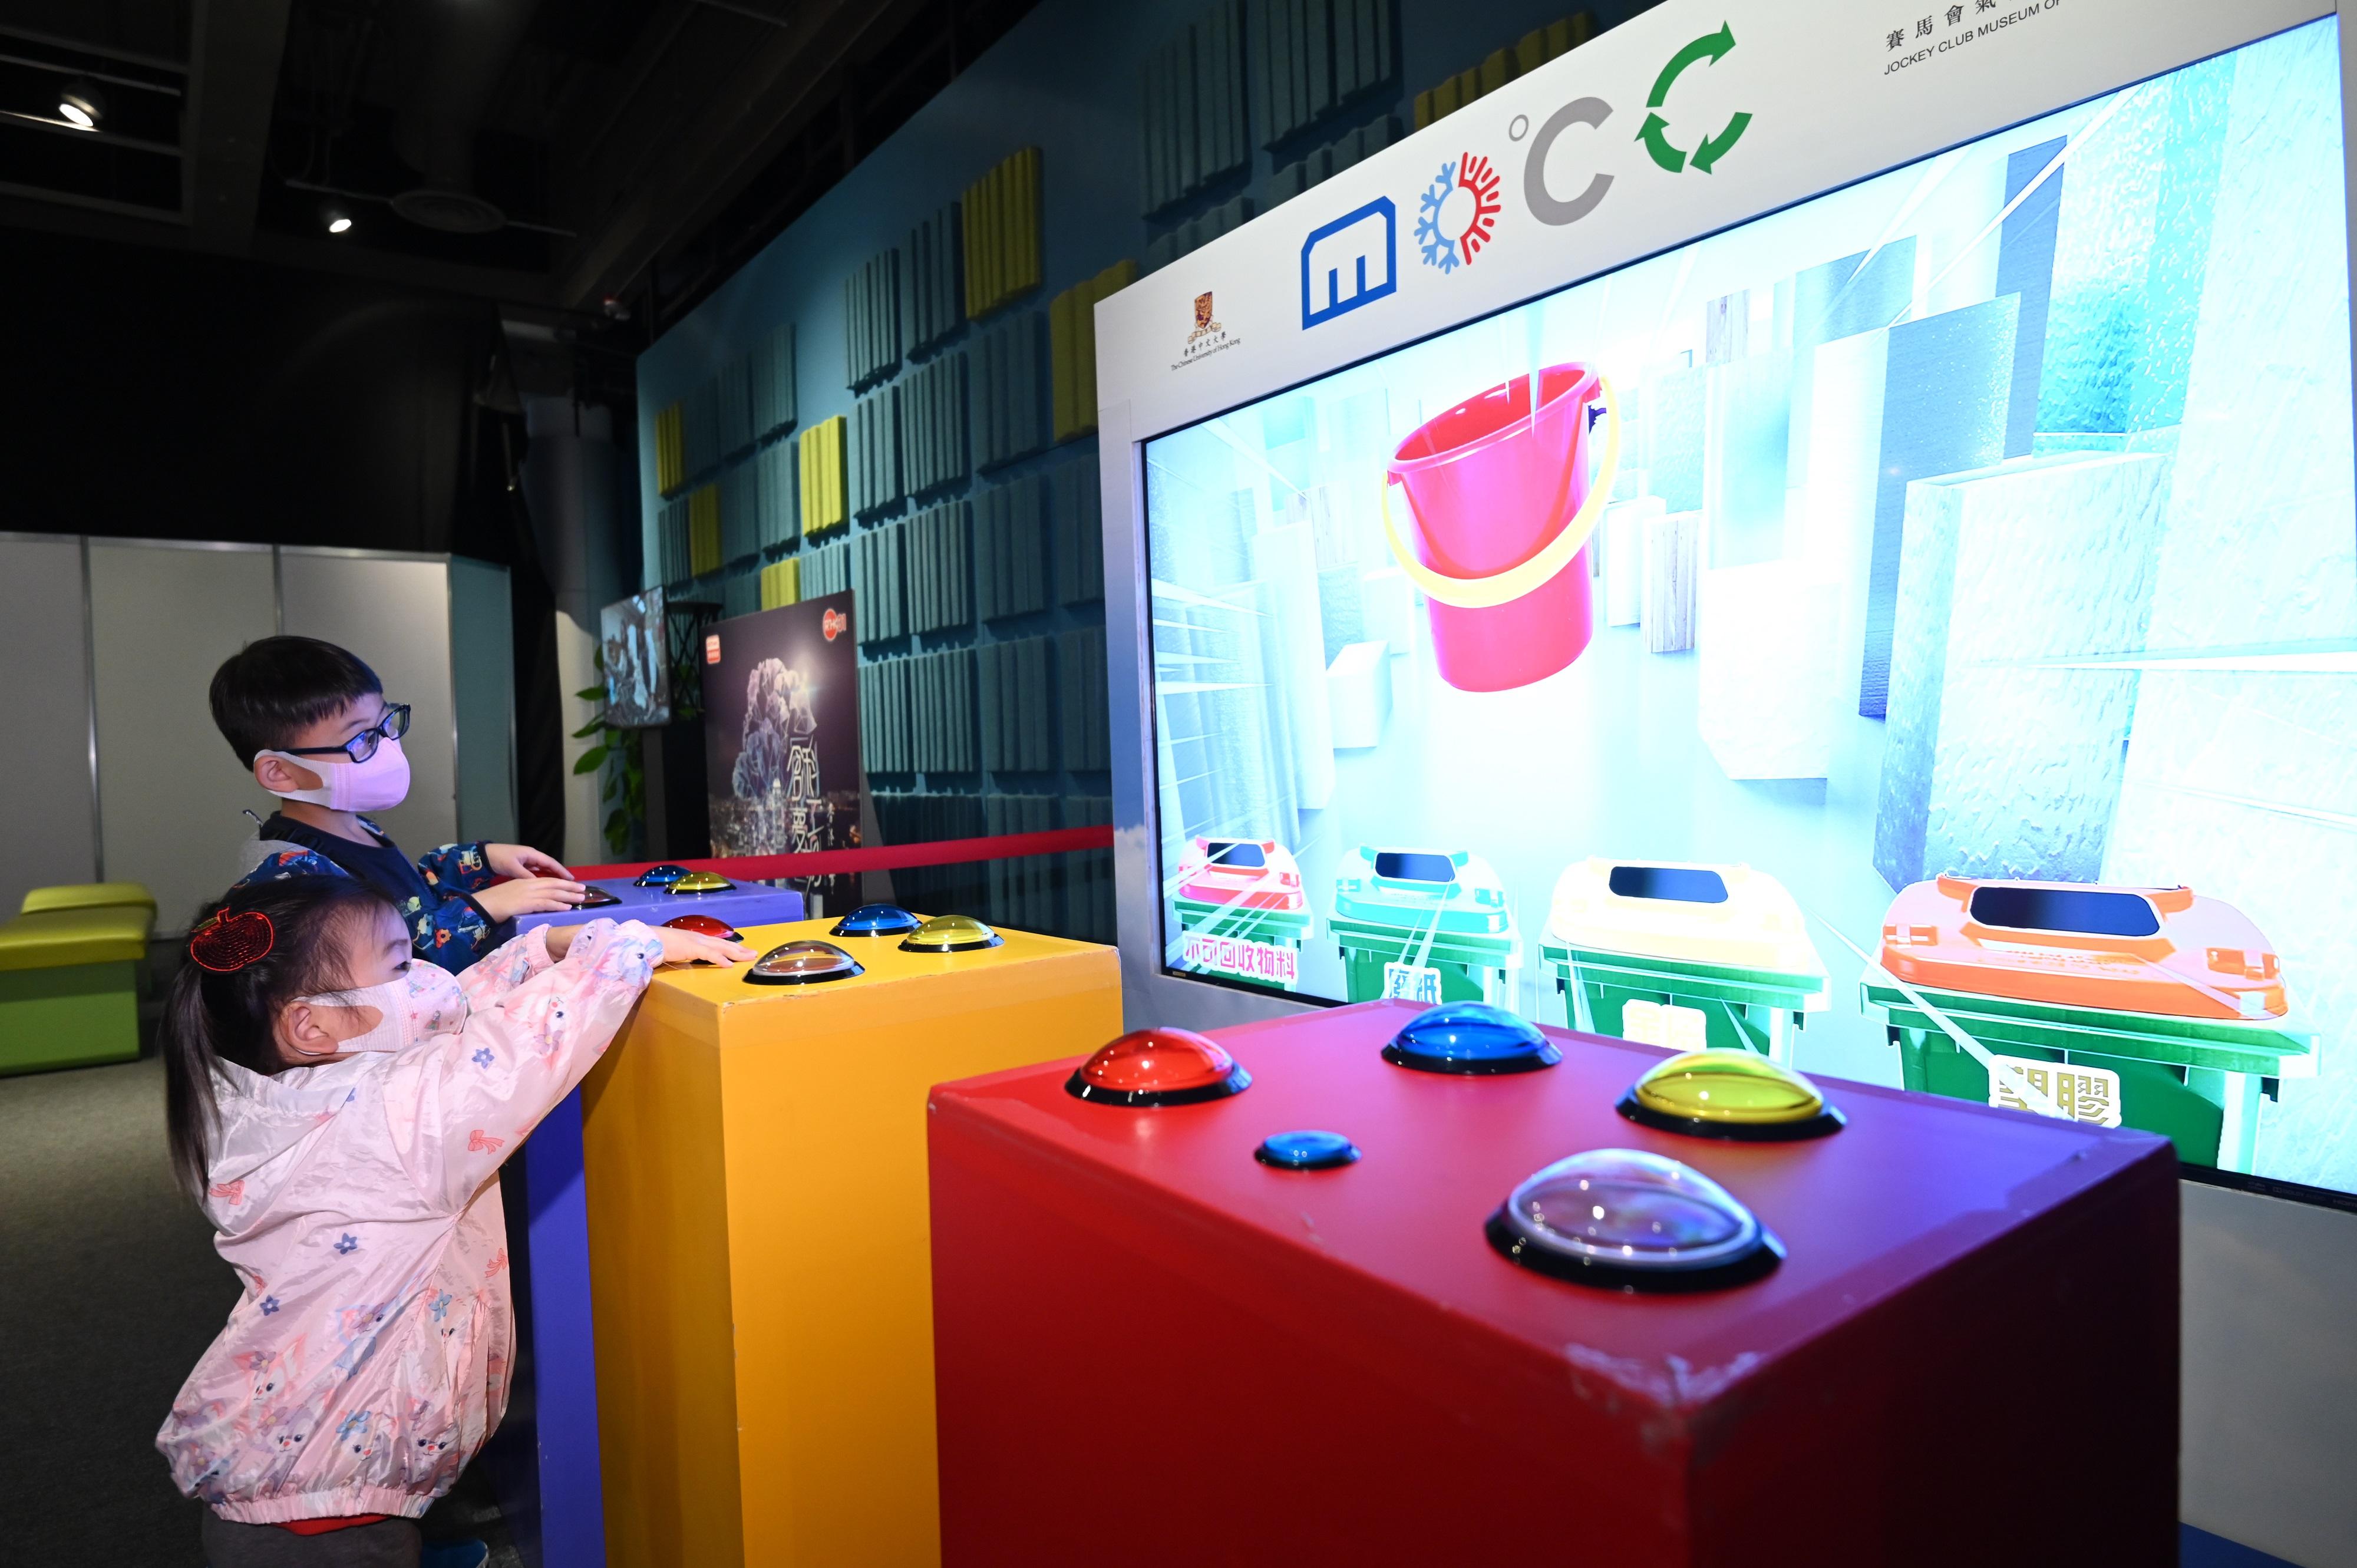 HK SciFest 2023, organised by the Science Promotion Unit of the Hong Kong Science Museum, will be held from today (March 31) to April 16 with the theme of "Science Around You". Photo shows children learning the fundamentals of climate change through multimedia interactive exhibits in the "Climate Action - Everyone Counts" exhibition at the Hong Kong Science Museum.